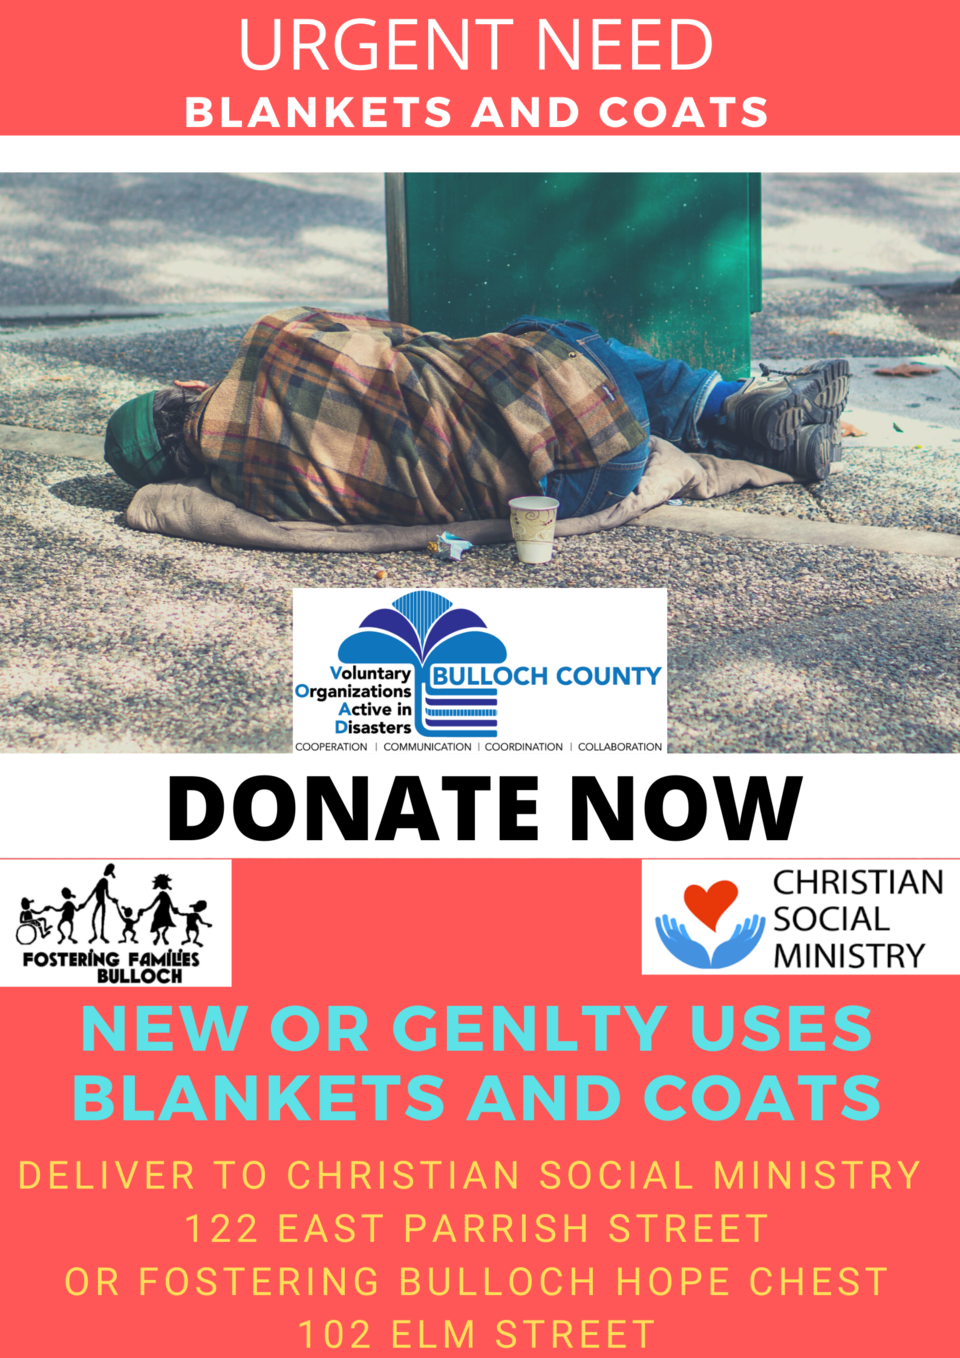 Urgent Need Blankets and Coats